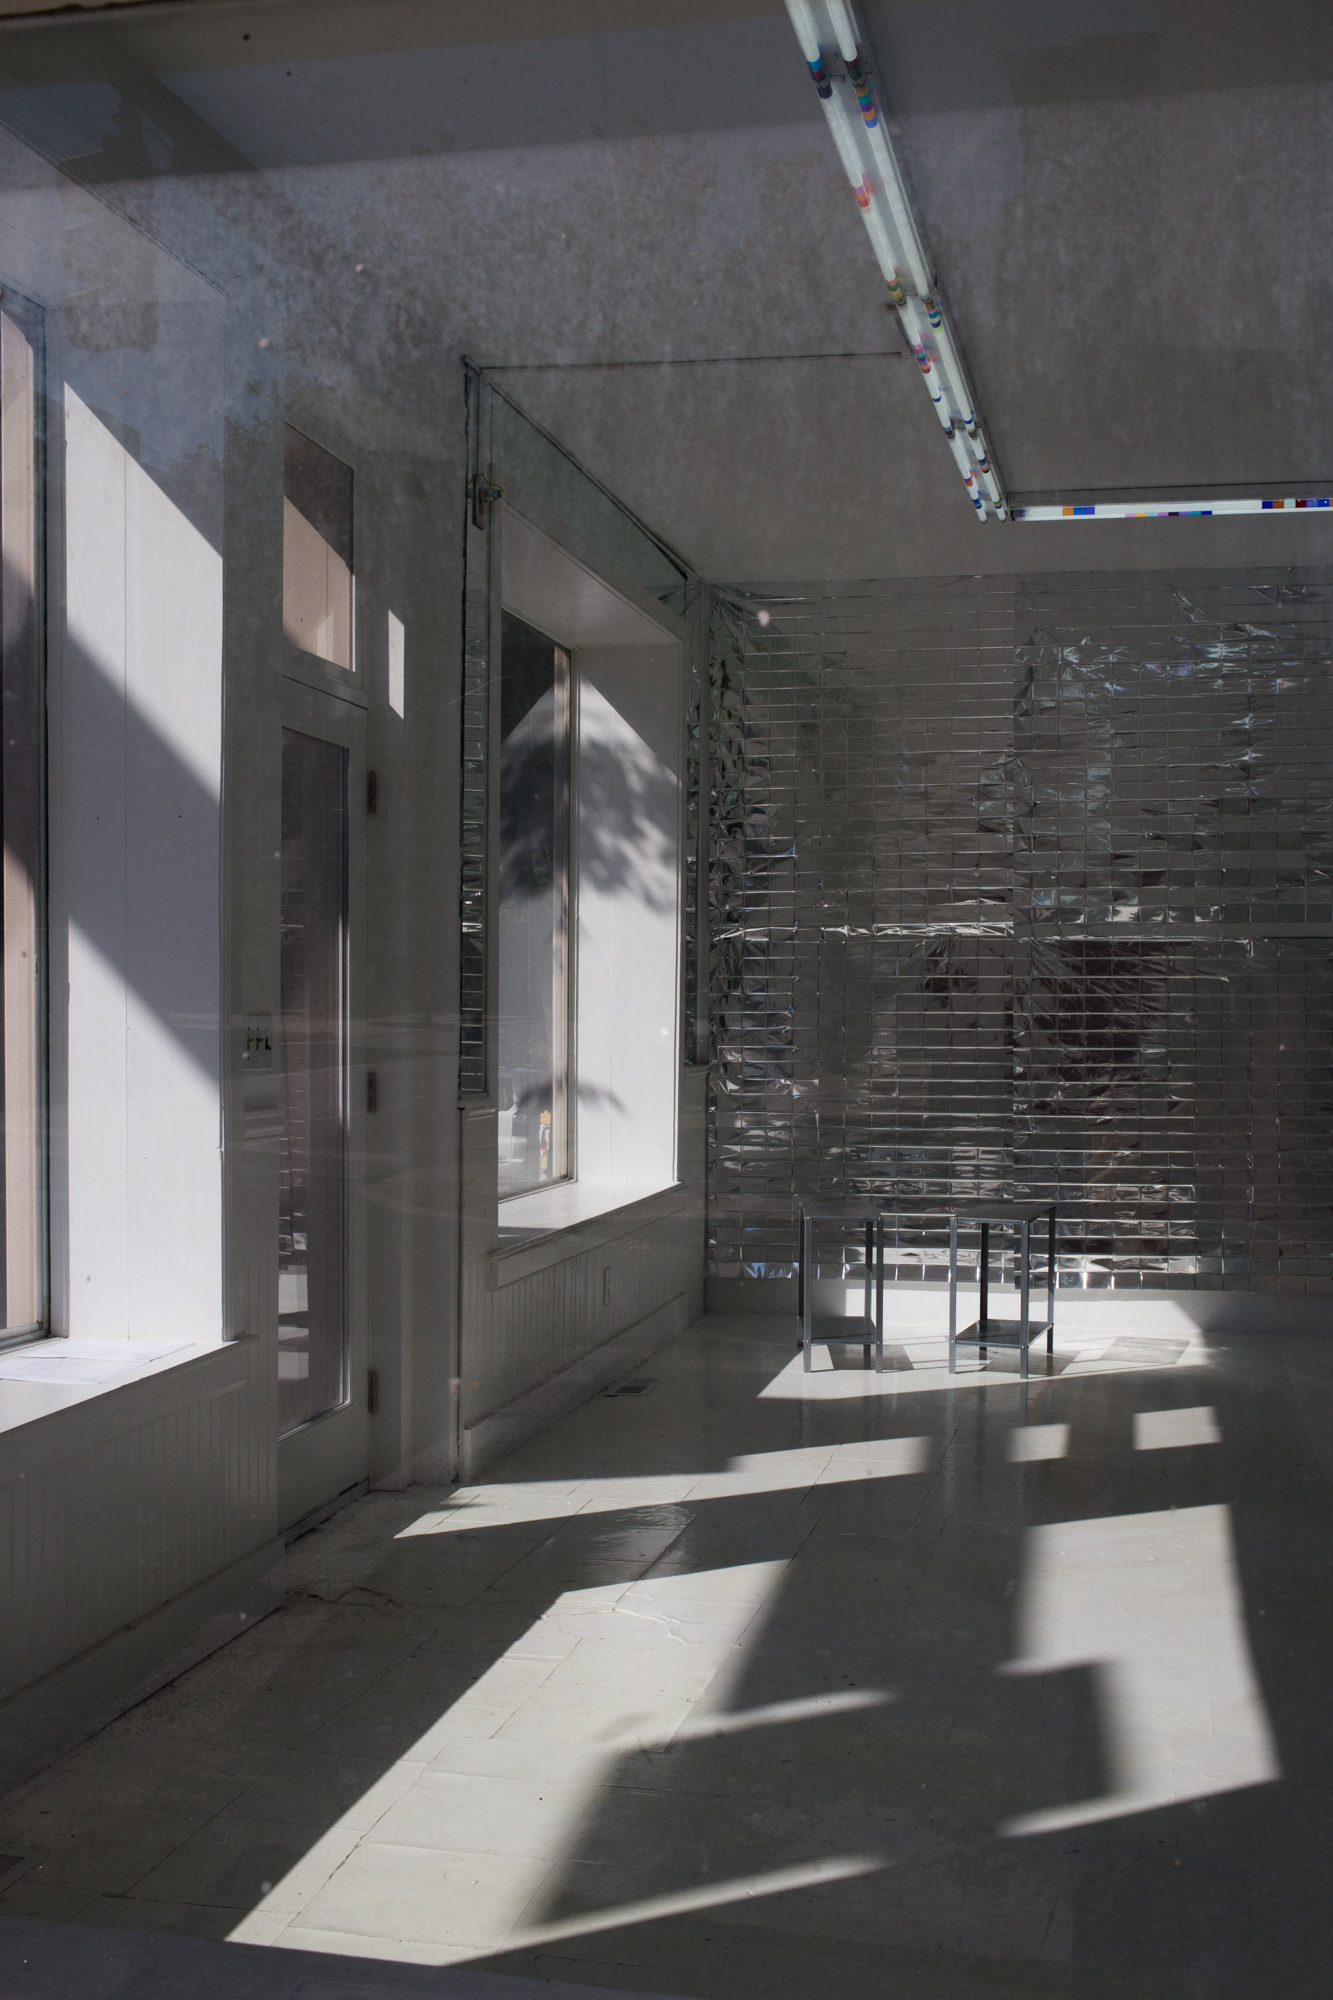 View through a window of reflective mylar hanging on a wall, with a pair of small metal tables in the foreground